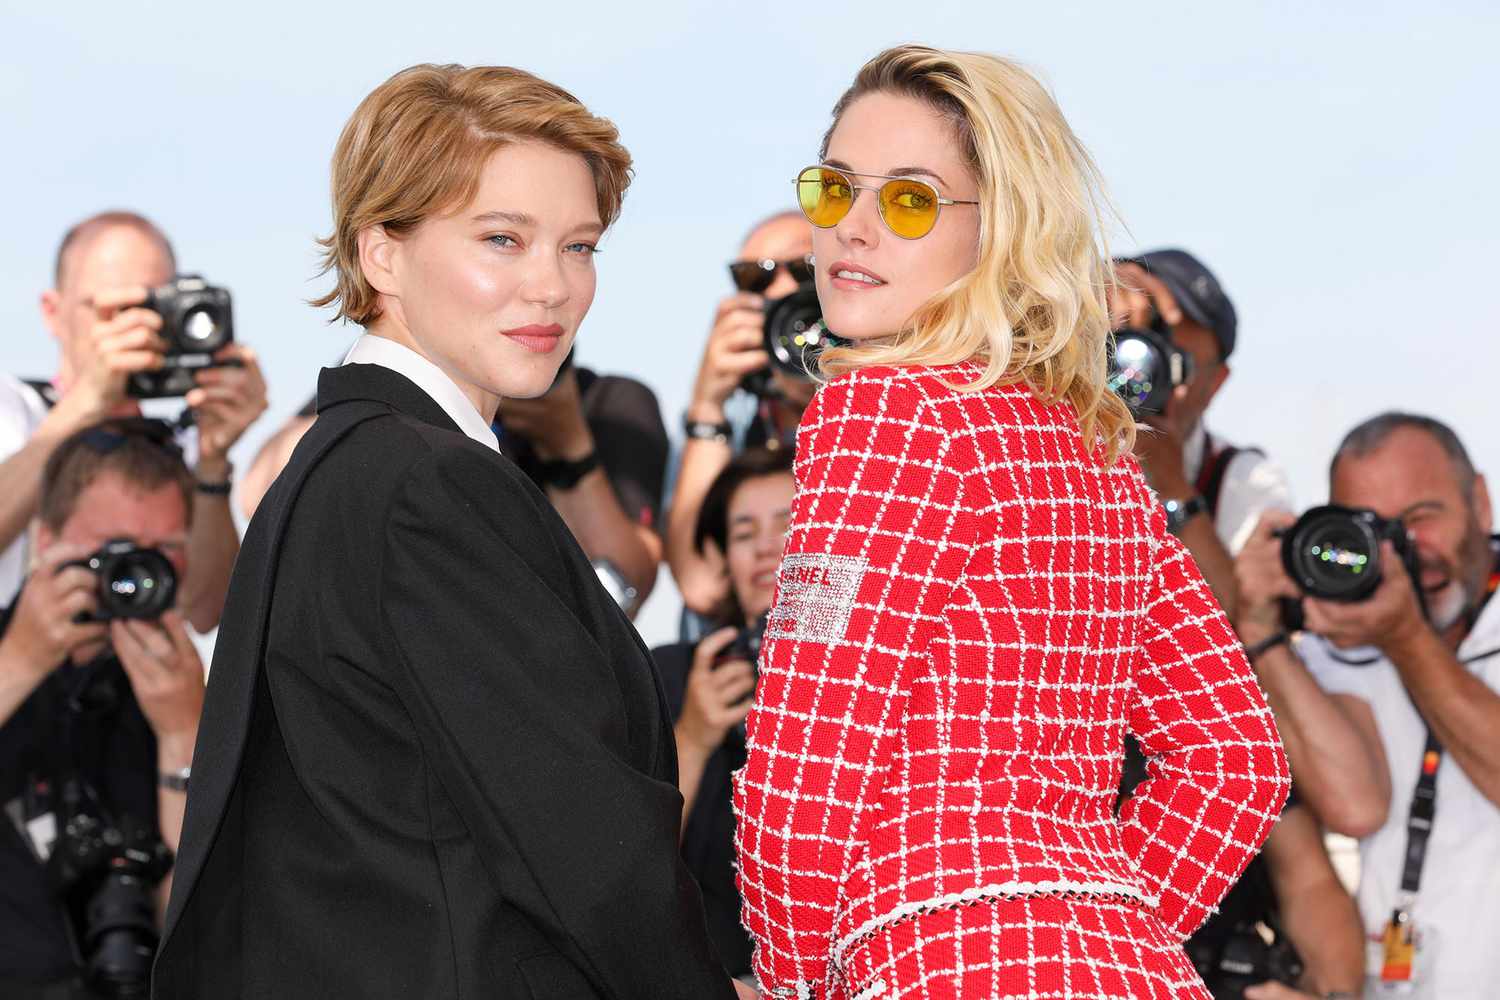 Cannes Film Festival 2022 Léa Seydoux and Kristen Stewart attend the photocall for "Crimes Of The Future" during the 75th annual Cannes film festival at Palais des Festivals on May 24, 2022 in Cannes, France.